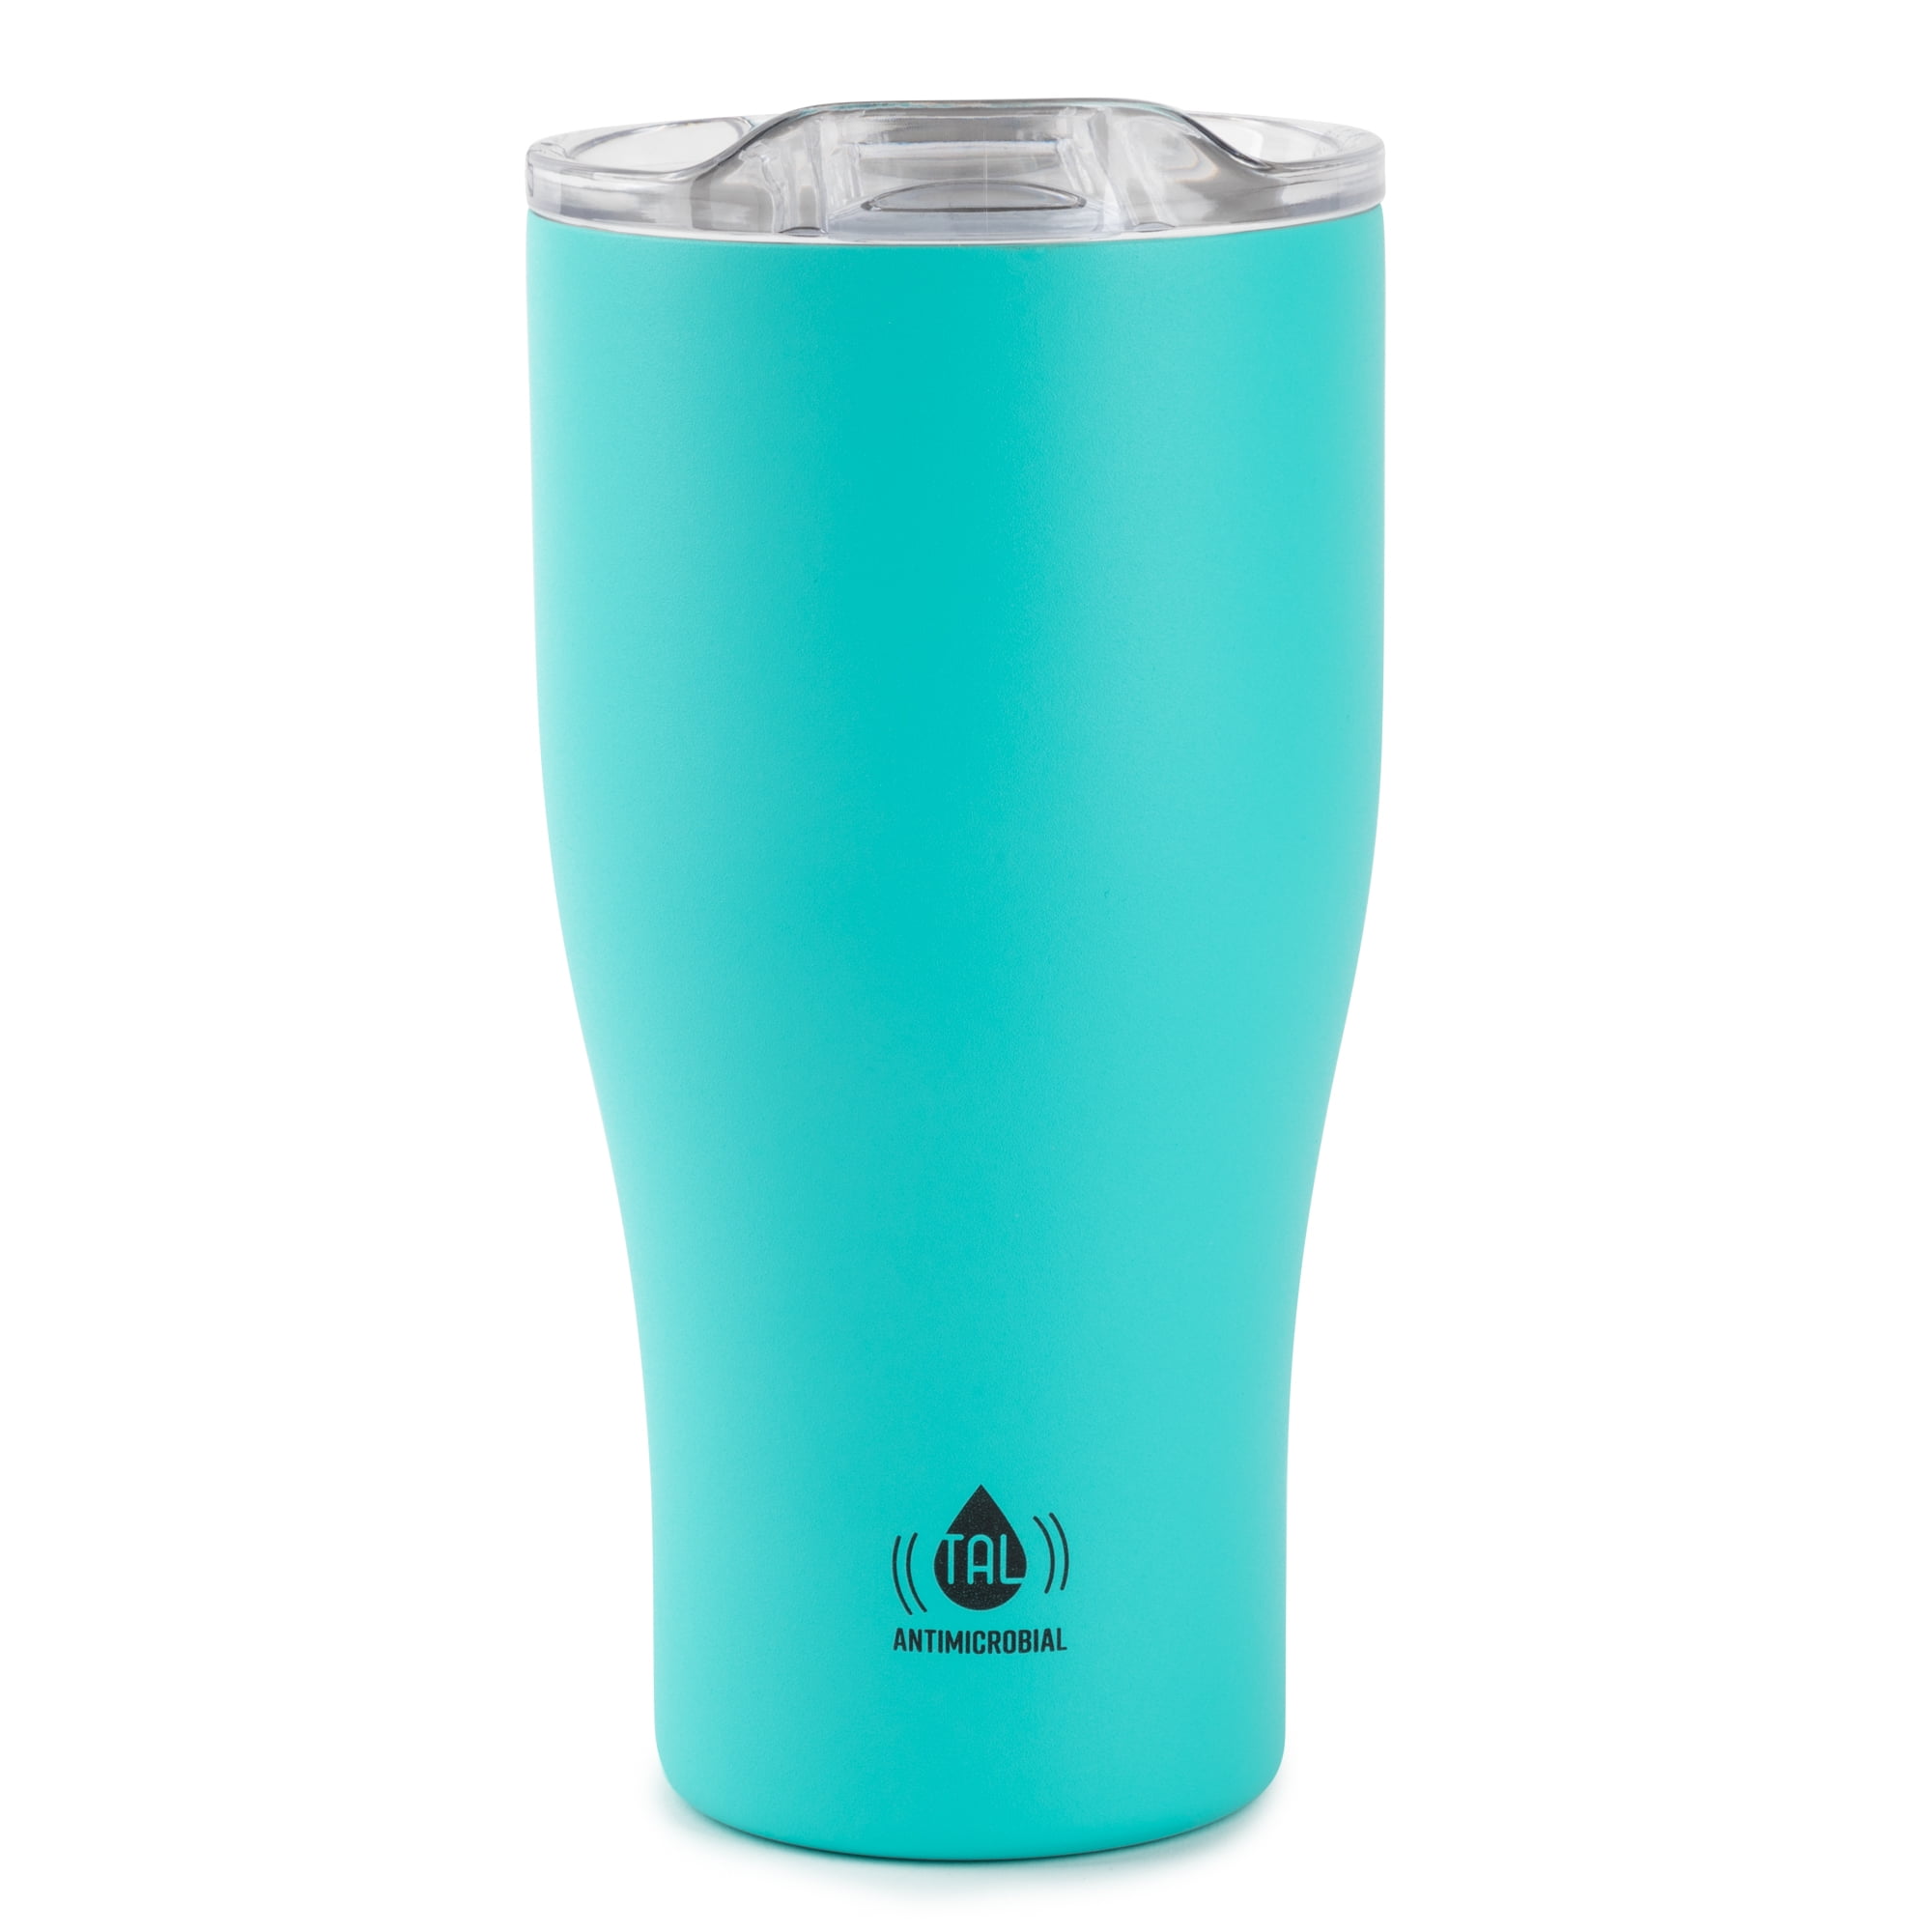 TAL Stainless Steel Antimicrobial Tumbler Water Bottle 20 fl oz, Black 